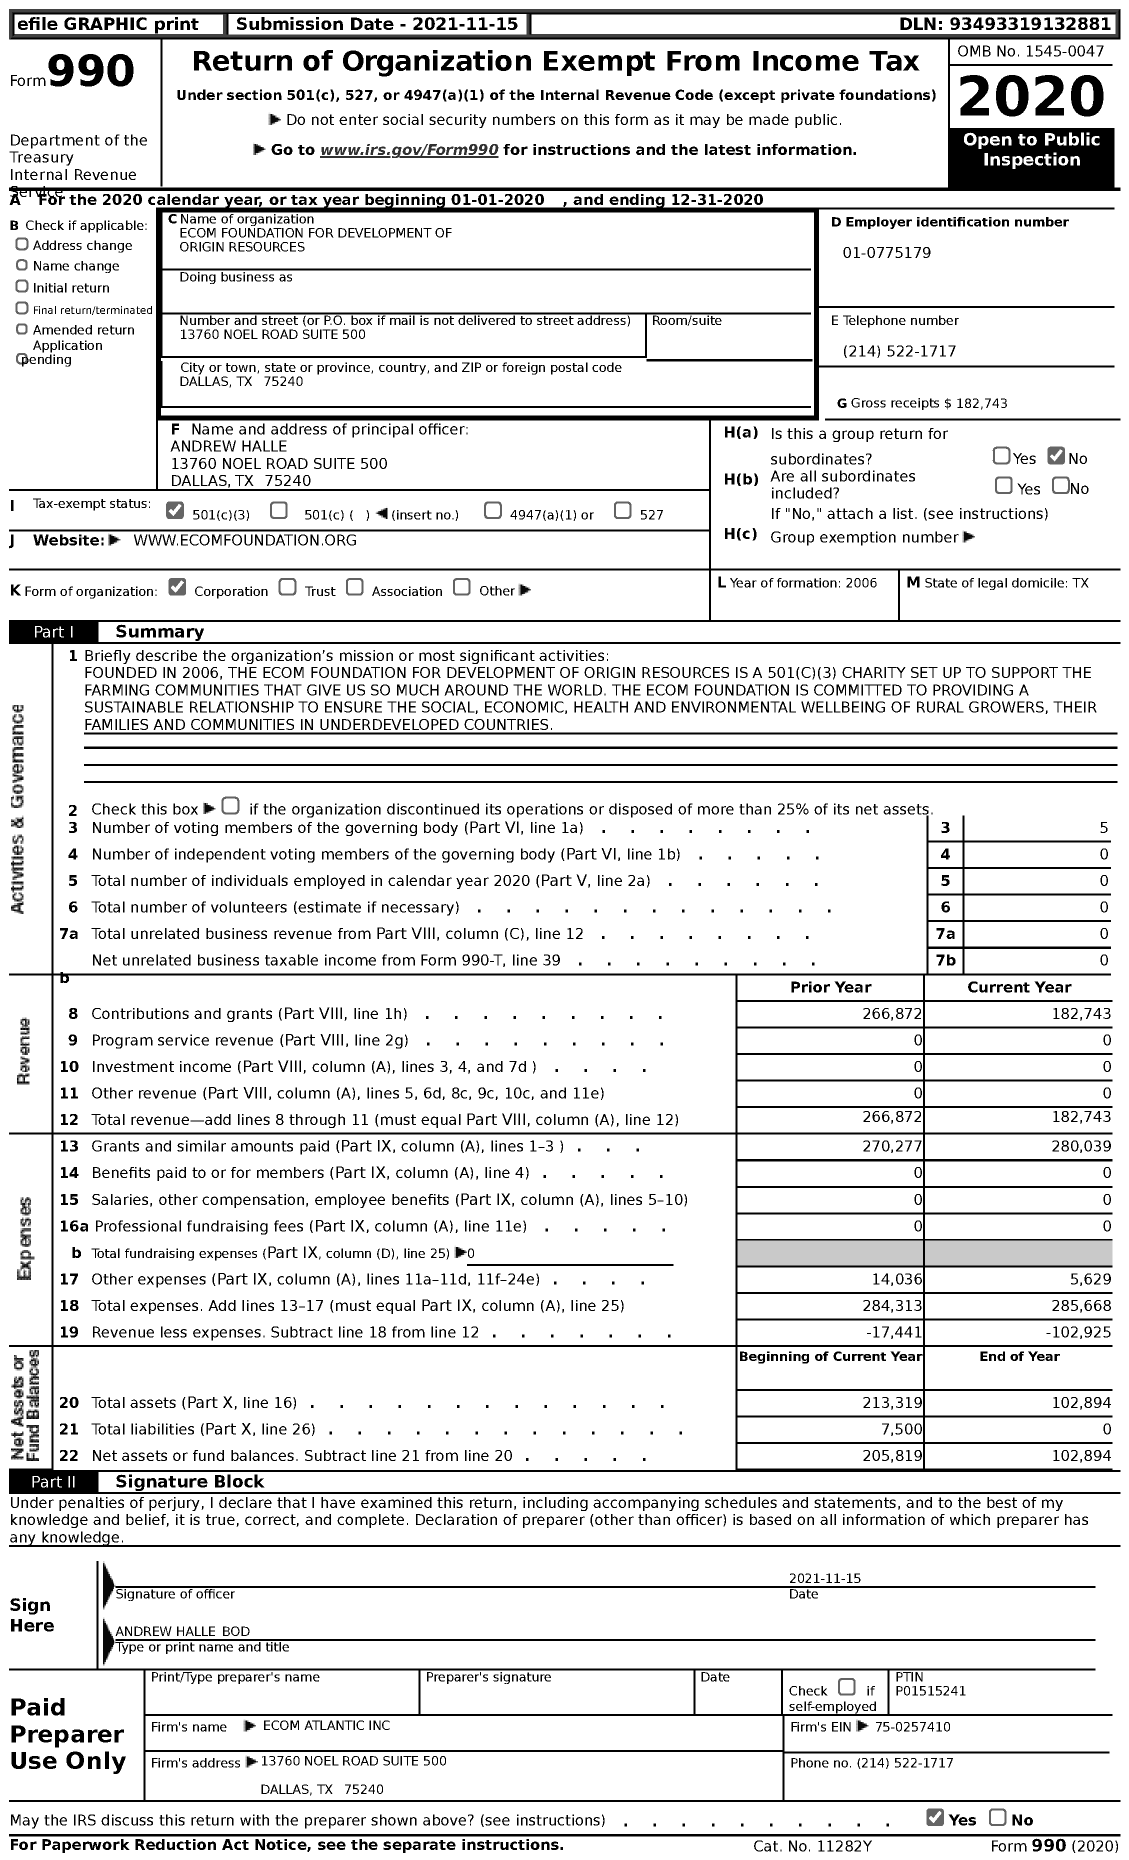 Image of first page of 2020 Form 990 for Ecom Foundation for Development of Origin Resources